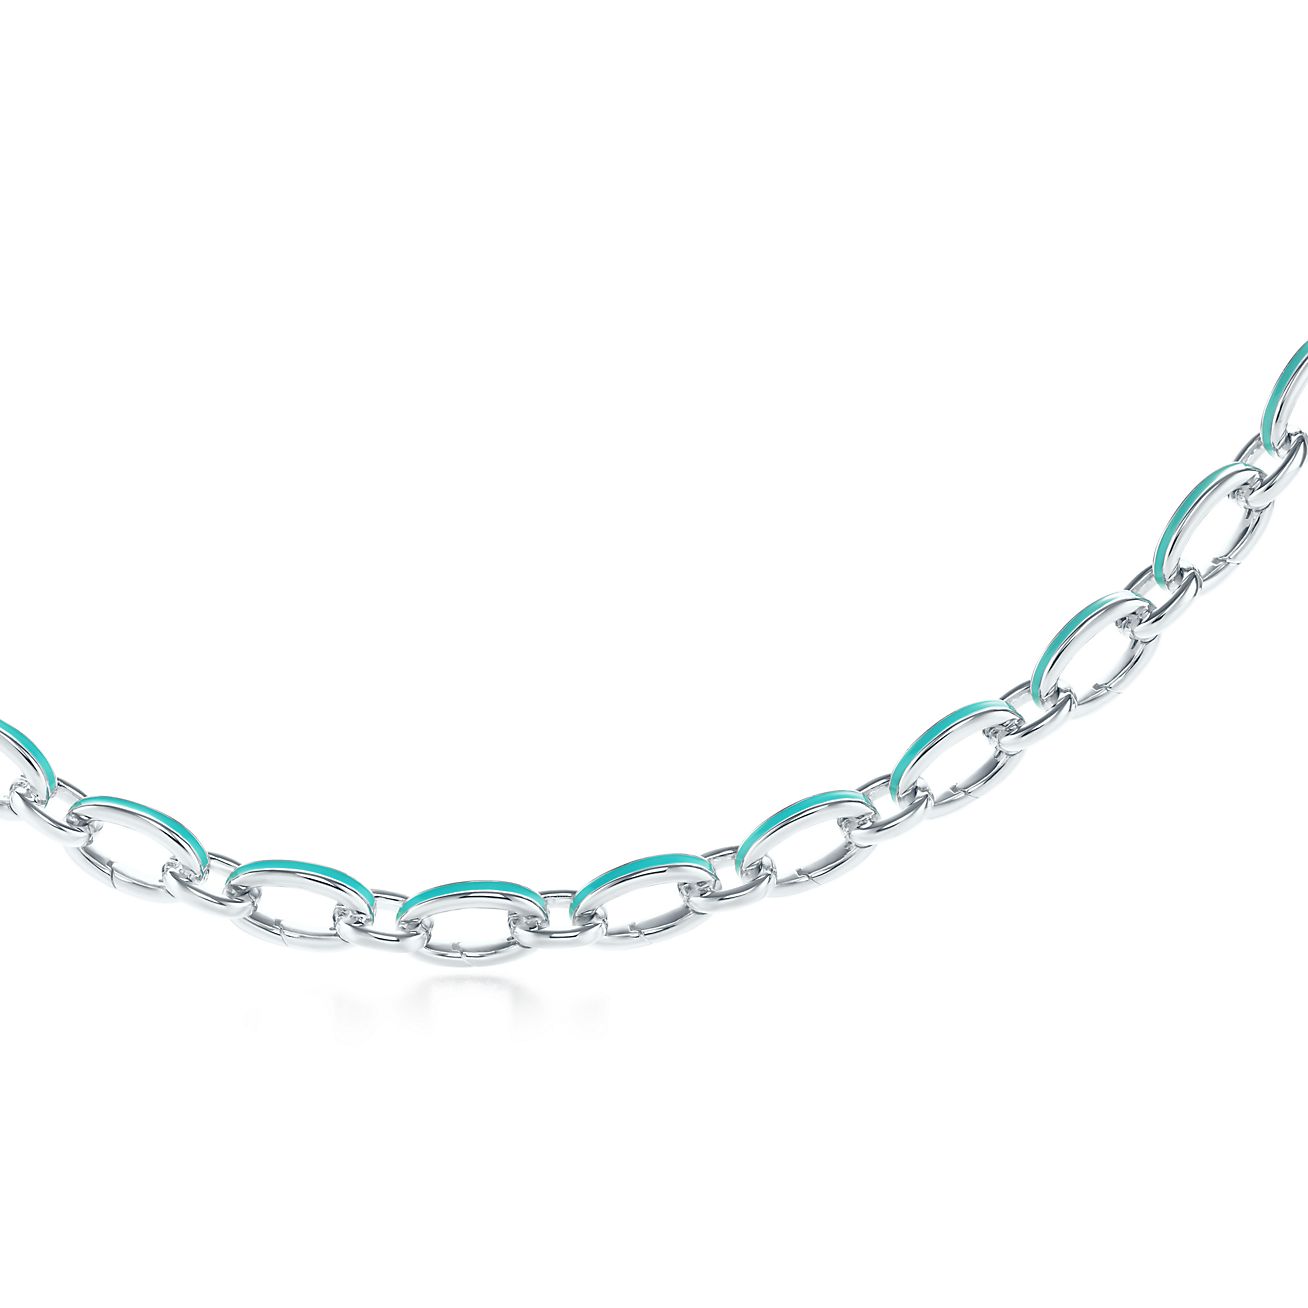 Tiffany Blue® clasping link bracelet in silver with enamel finish 